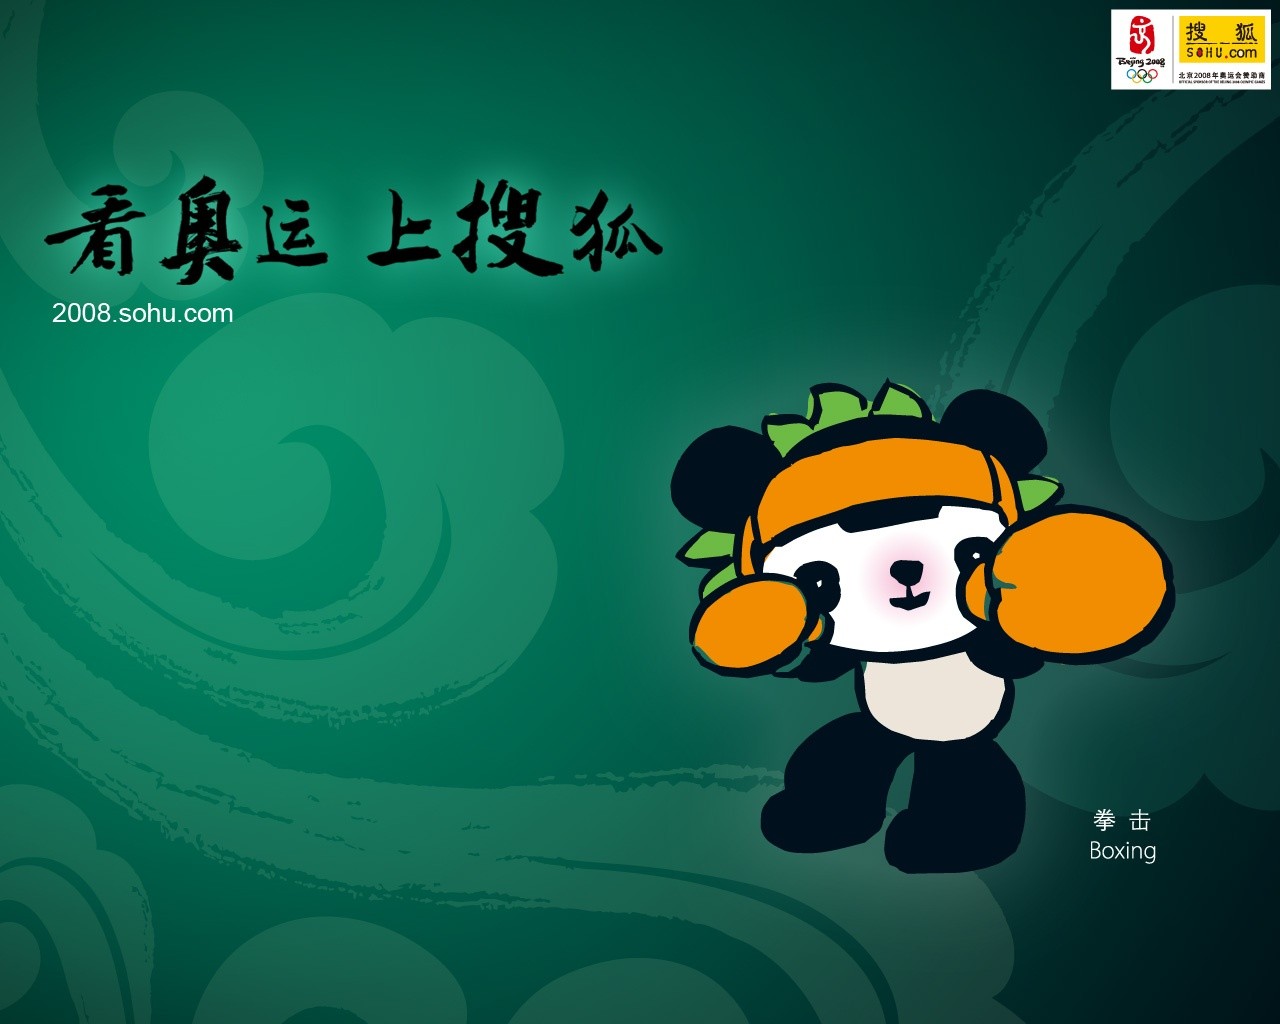 08 Olympic Games Fuwa Wallpapers #18 - 1280x1024